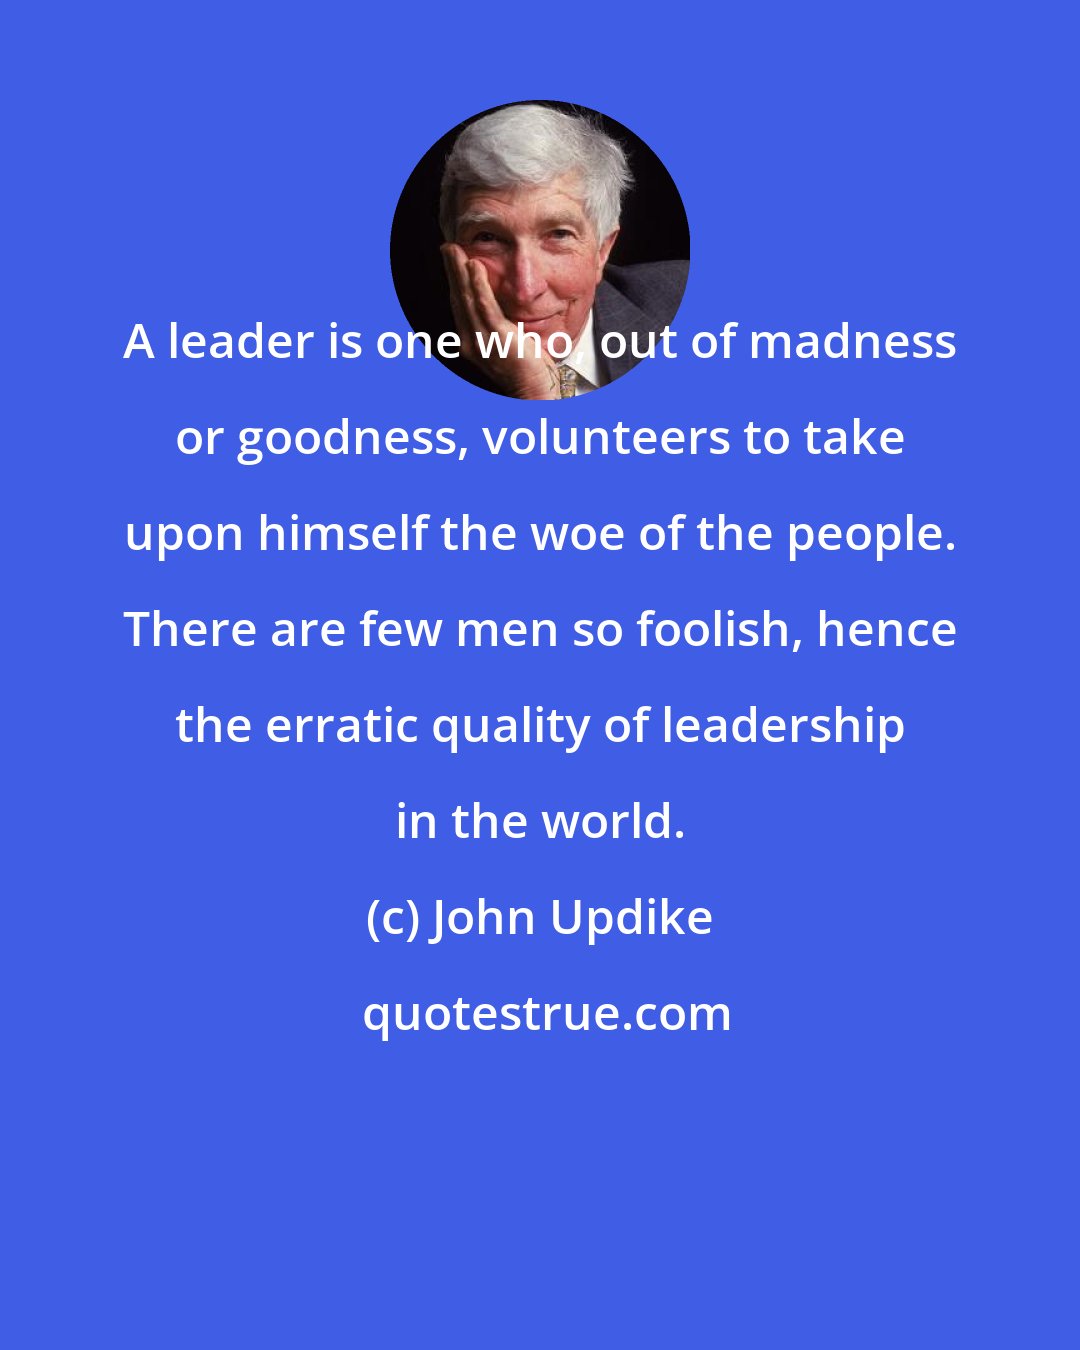 John Updike: A leader is one who, out of madness or goodness, volunteers to take upon himself the woe of the people. There are few men so foolish, hence the erratic quality of leadership in the world.